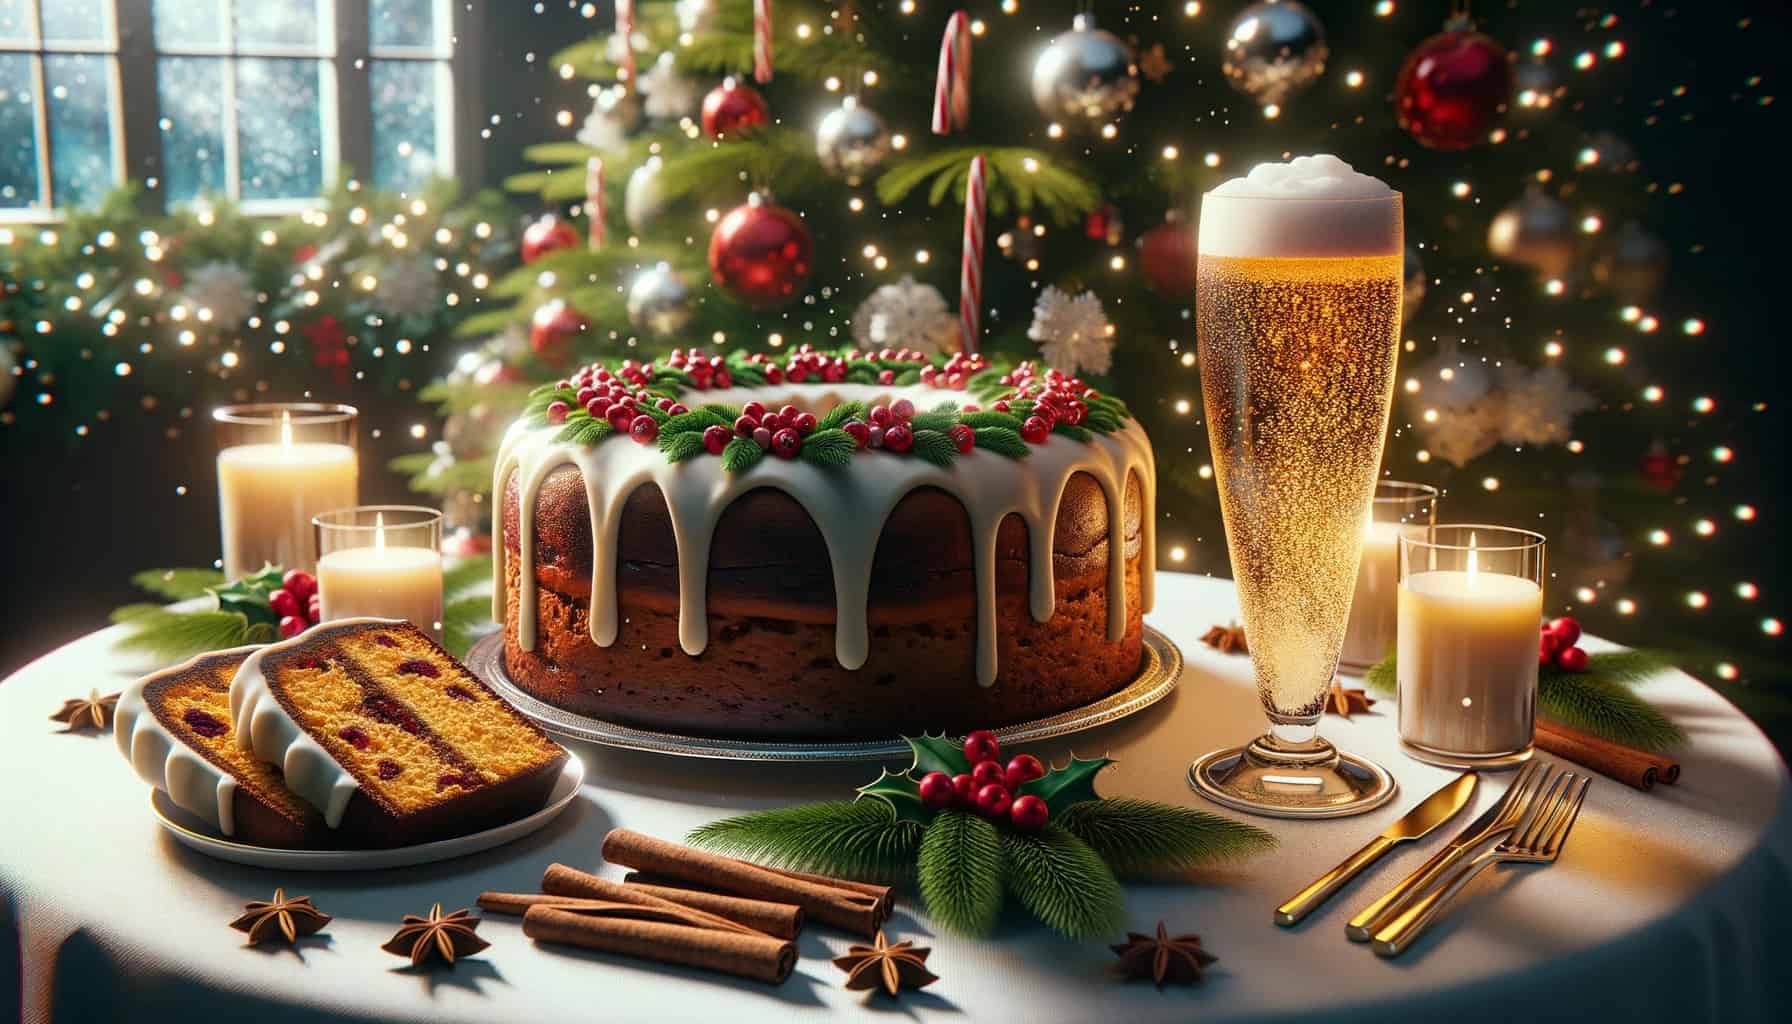 Trinidadian christmas table. In the center is a beautifully decorated christmas cake, surrounded by slices ready to be served. Beside it are tall glasses of sparkling ginger beer with bubbles rising to the top. The table is adorned with christmas decorations, and the warm glow of candles adds to the festive ambiance.